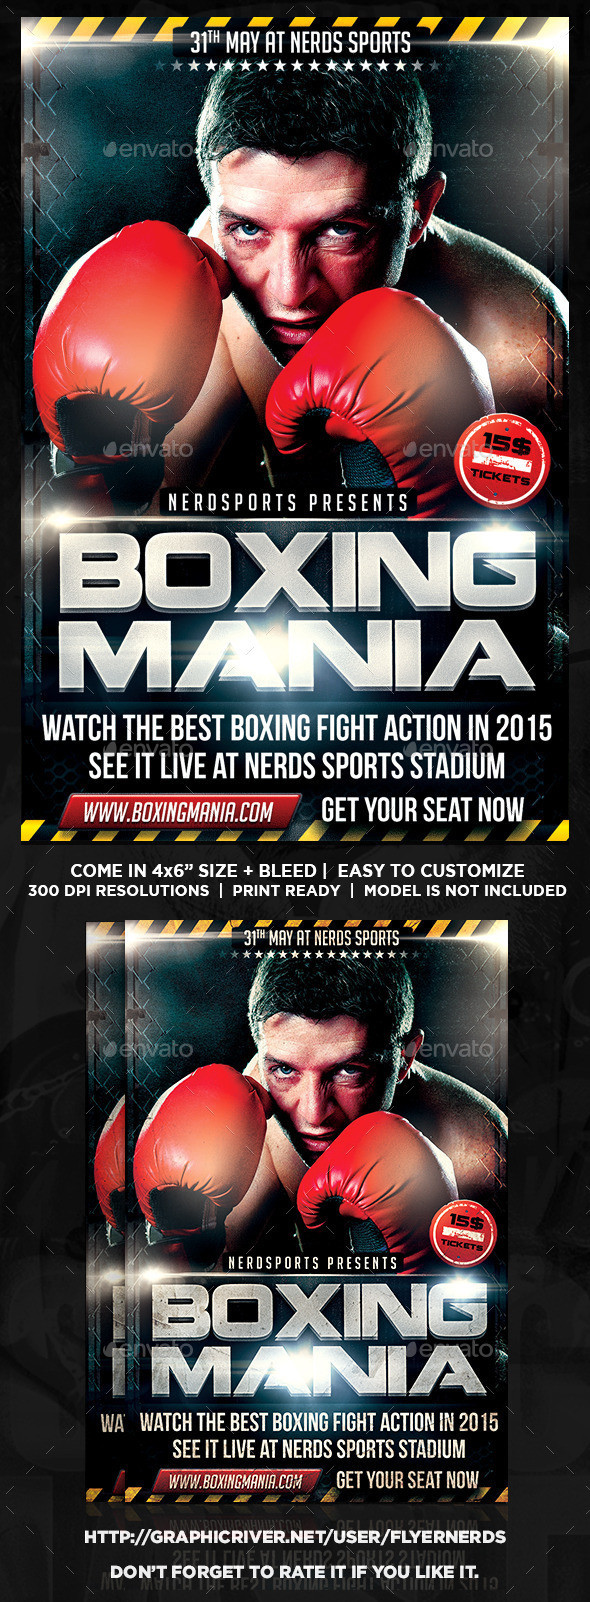 Boxing 20mania 20sports 20flyer 20preview